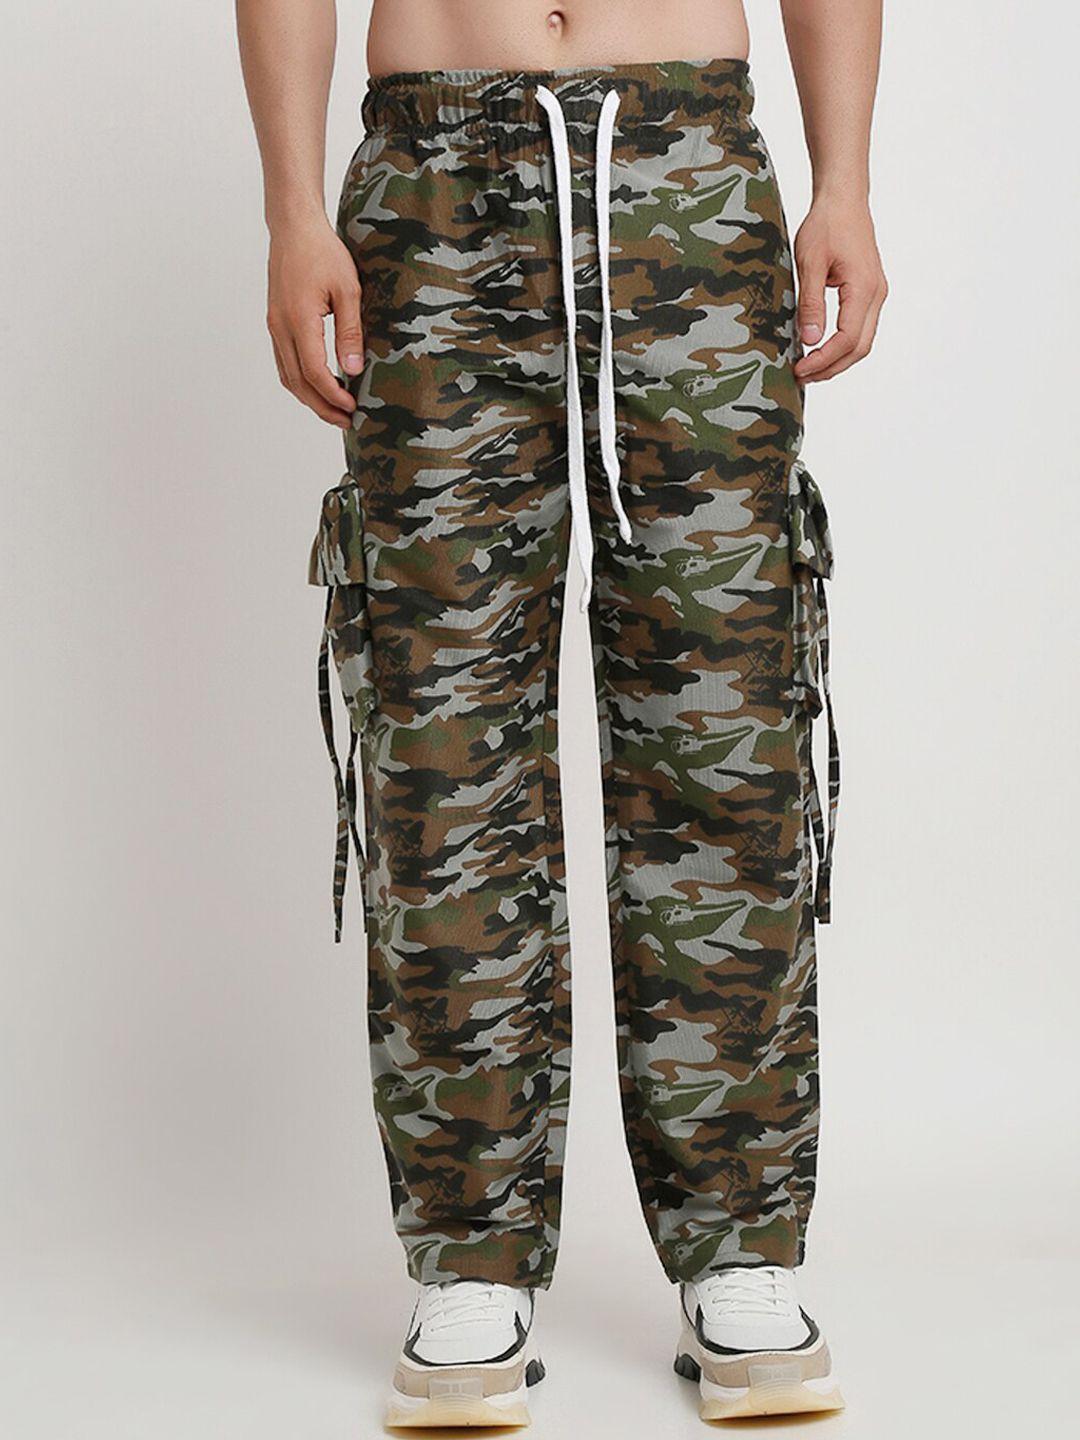 everdion-men-khaki-camouflage-printed-relaxed-straight-leg-high-rise-easy-wash-trousers